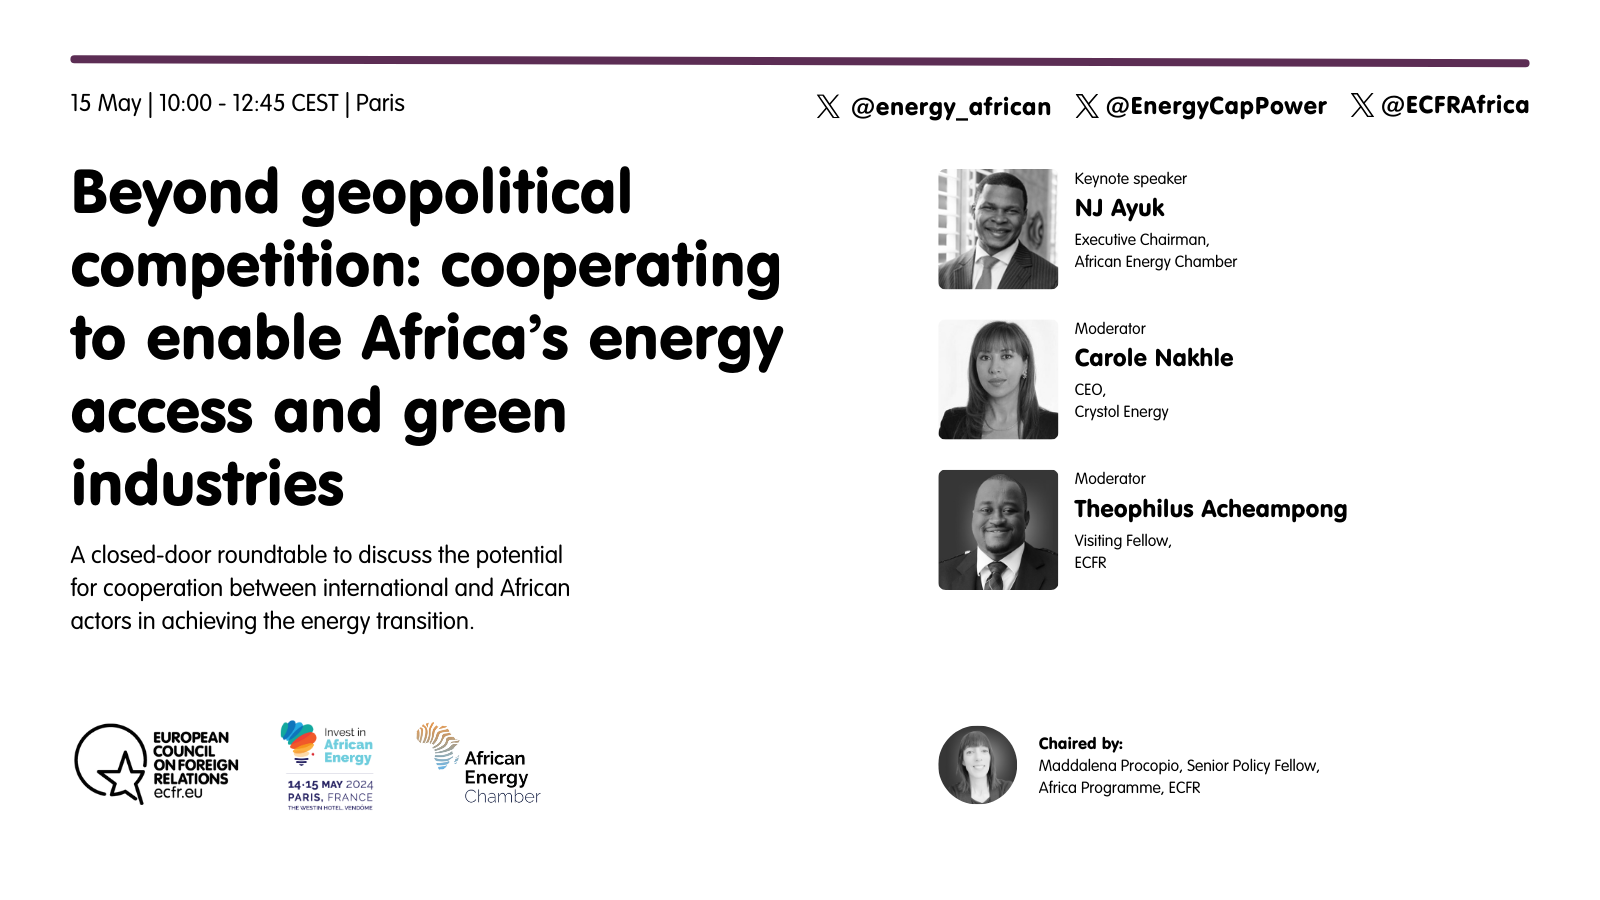 Beyond geopolitical competition: cooperating to enable Africa’s energy access and green industries